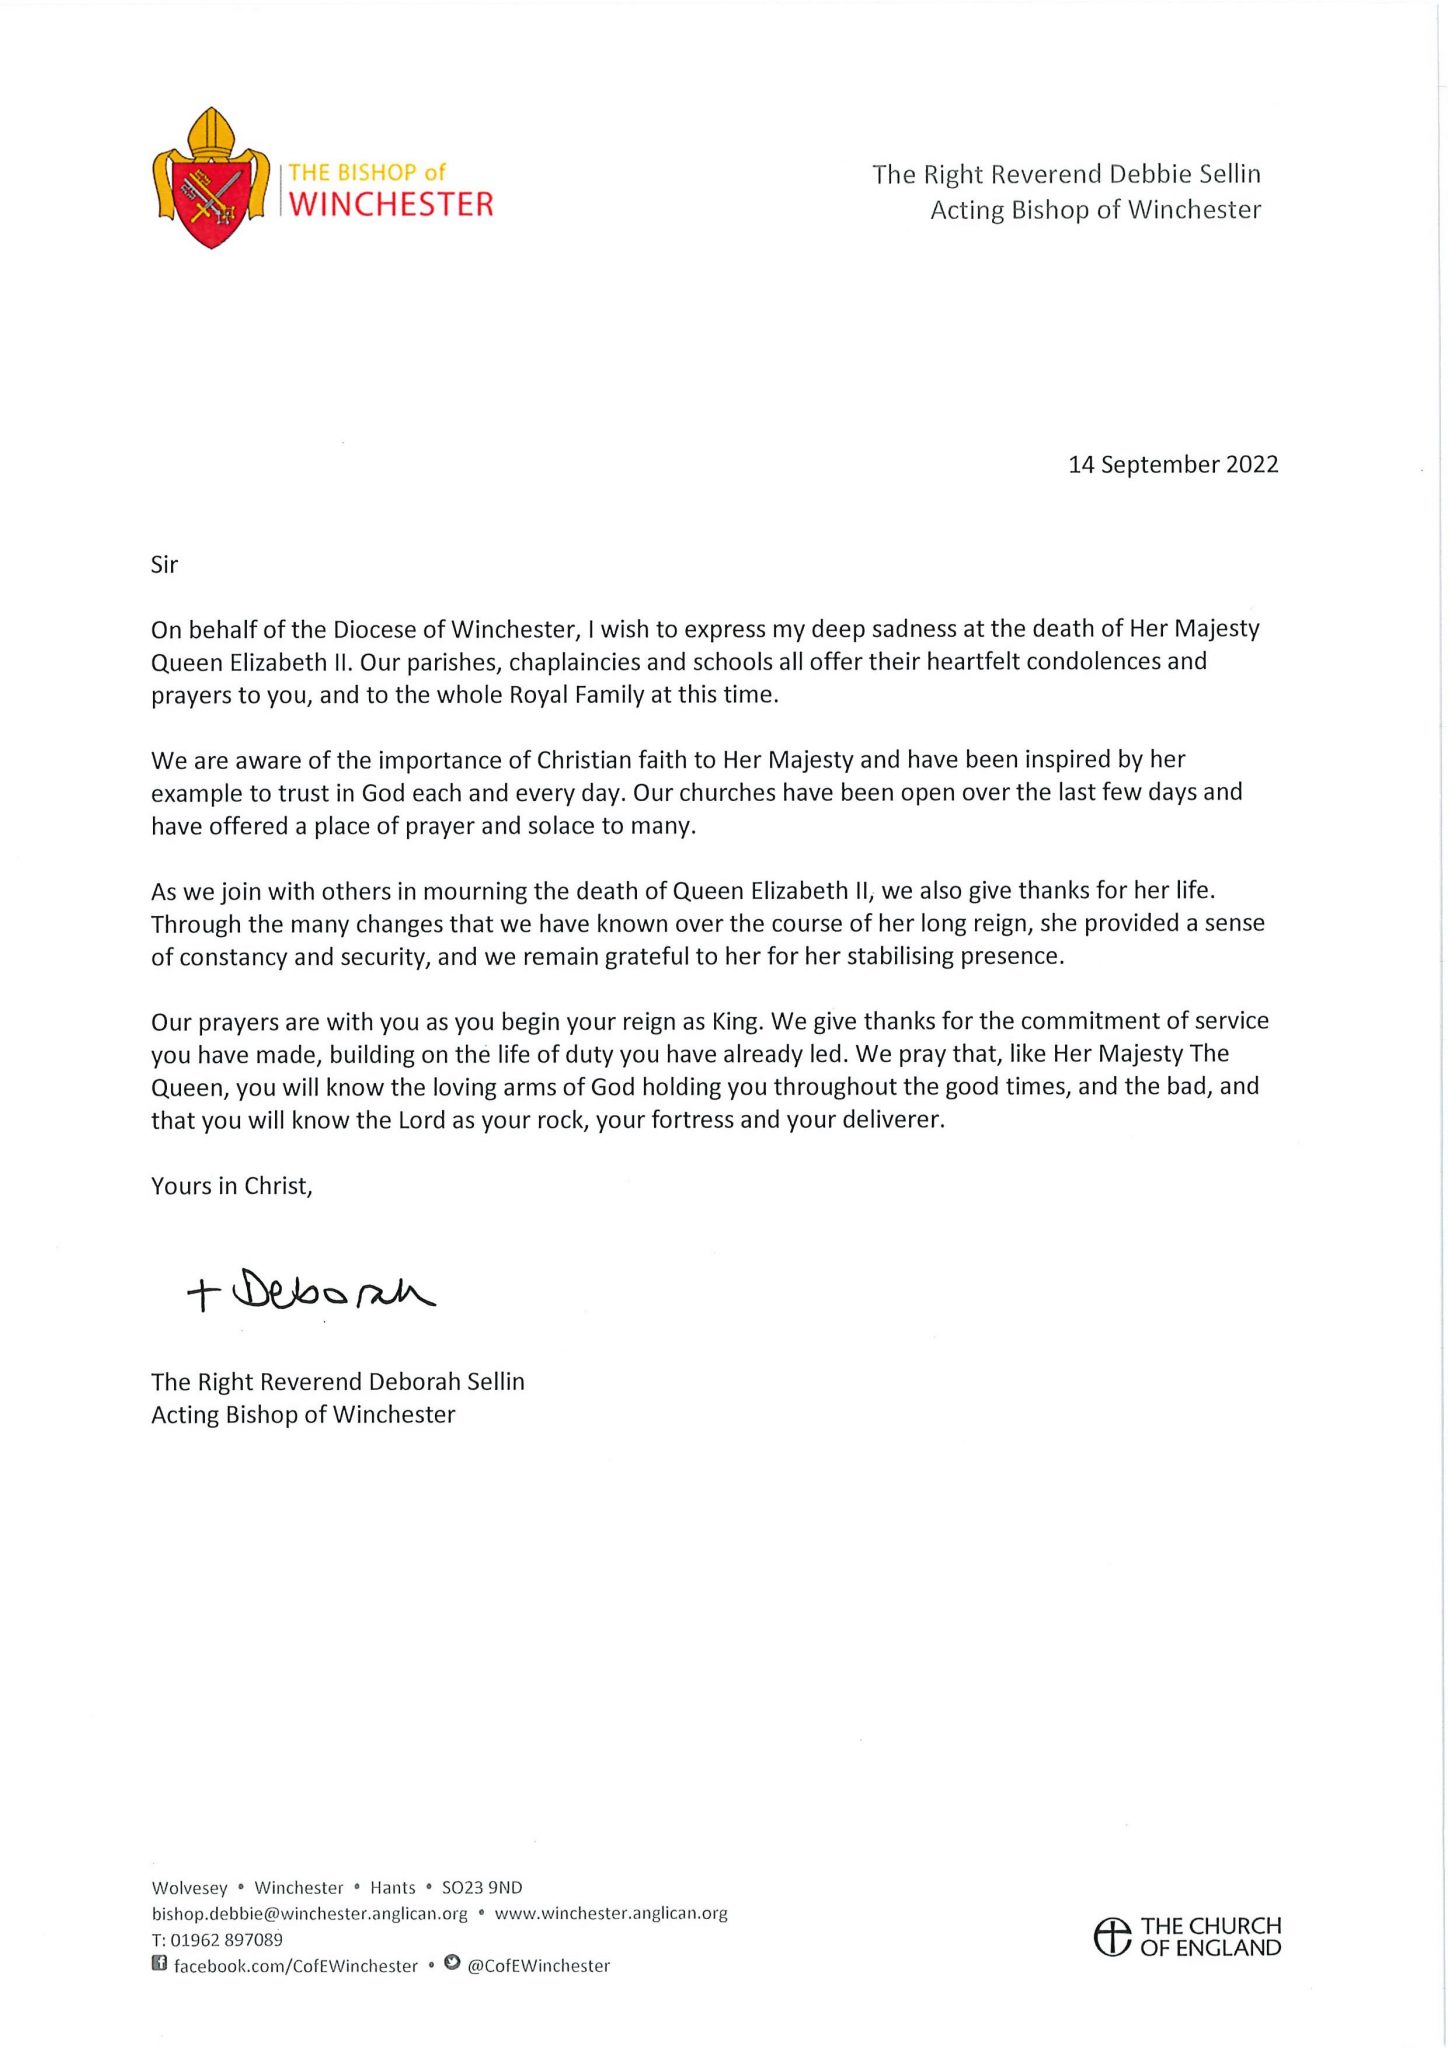 letter-of-condolence-diocese-of-winchester